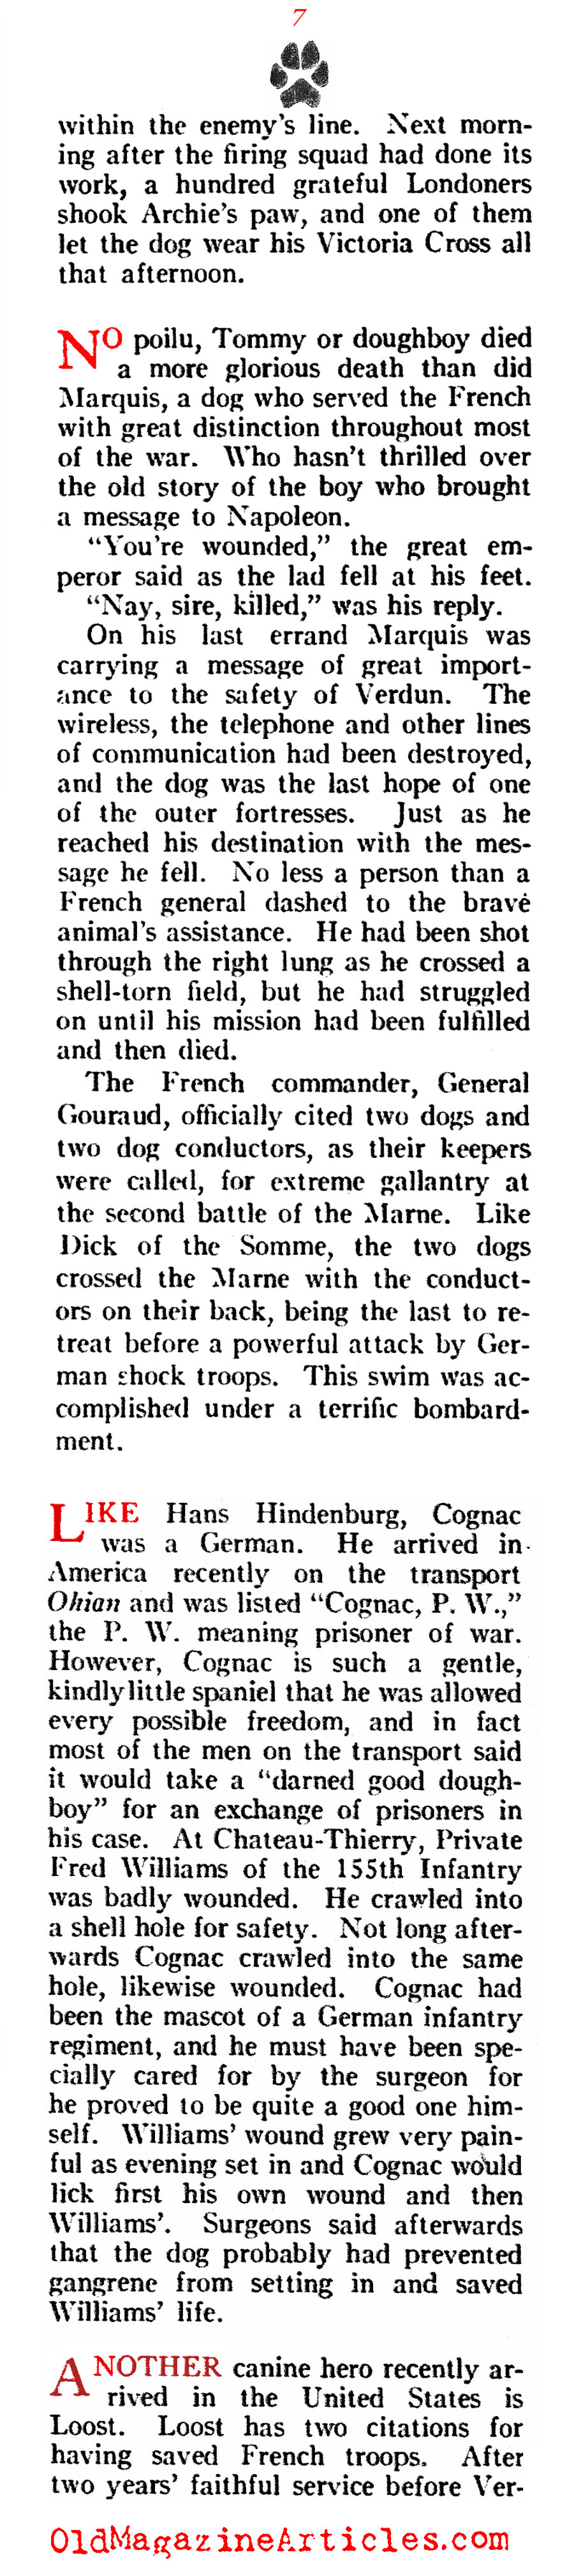 A History of Dogs in the First World War (American Legion Weekly, 1919)